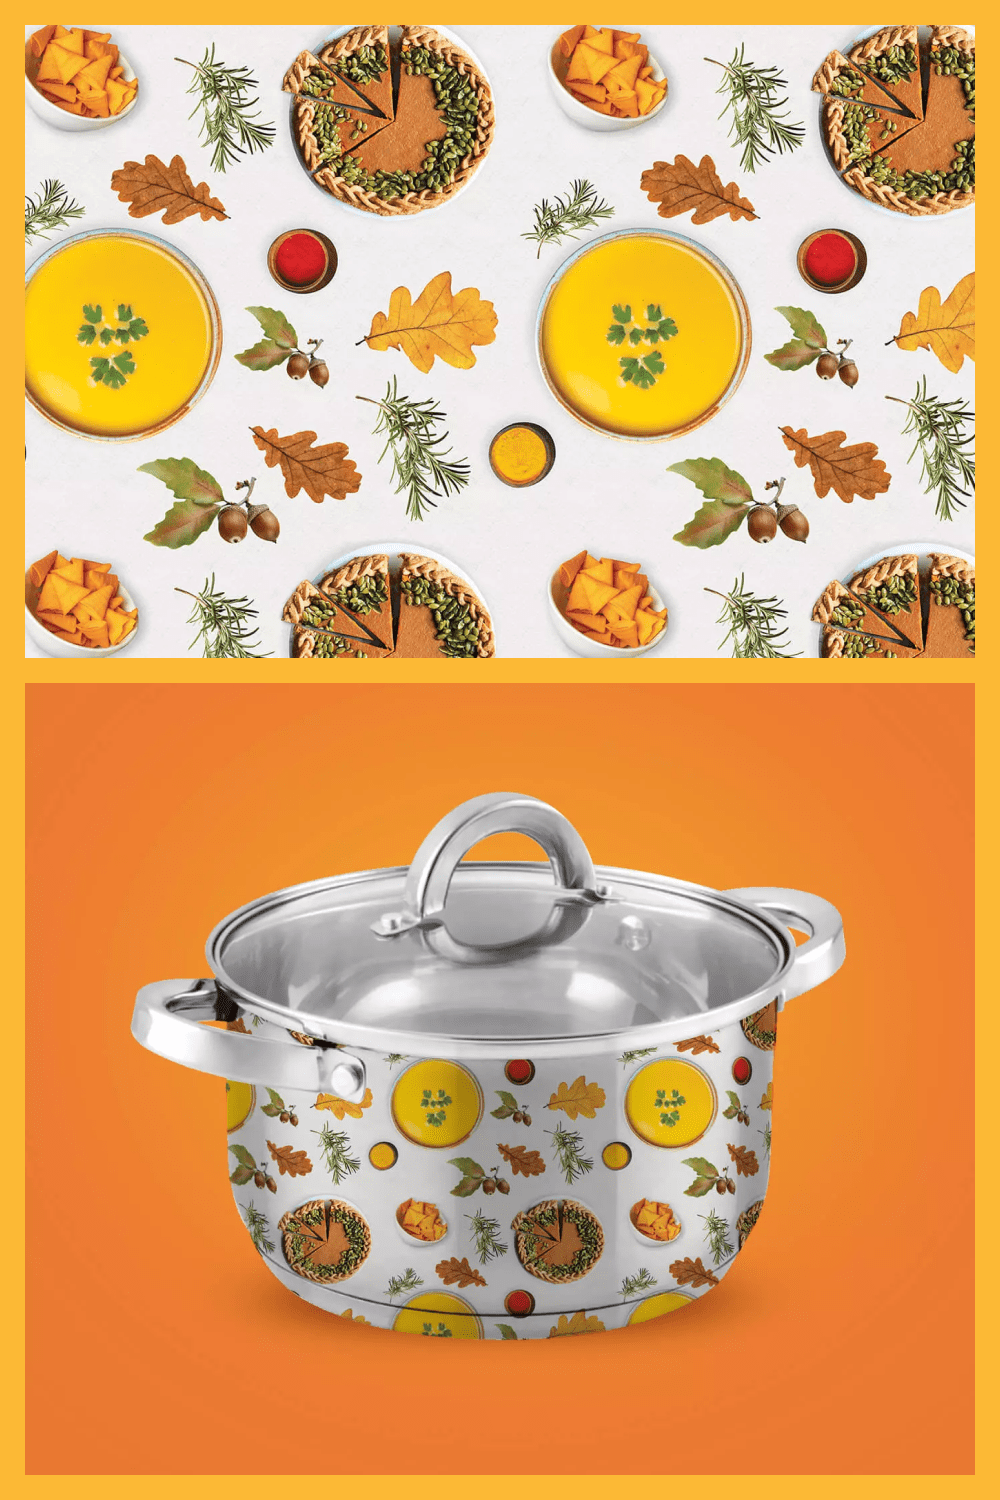 Saucepan with autumn images on it.